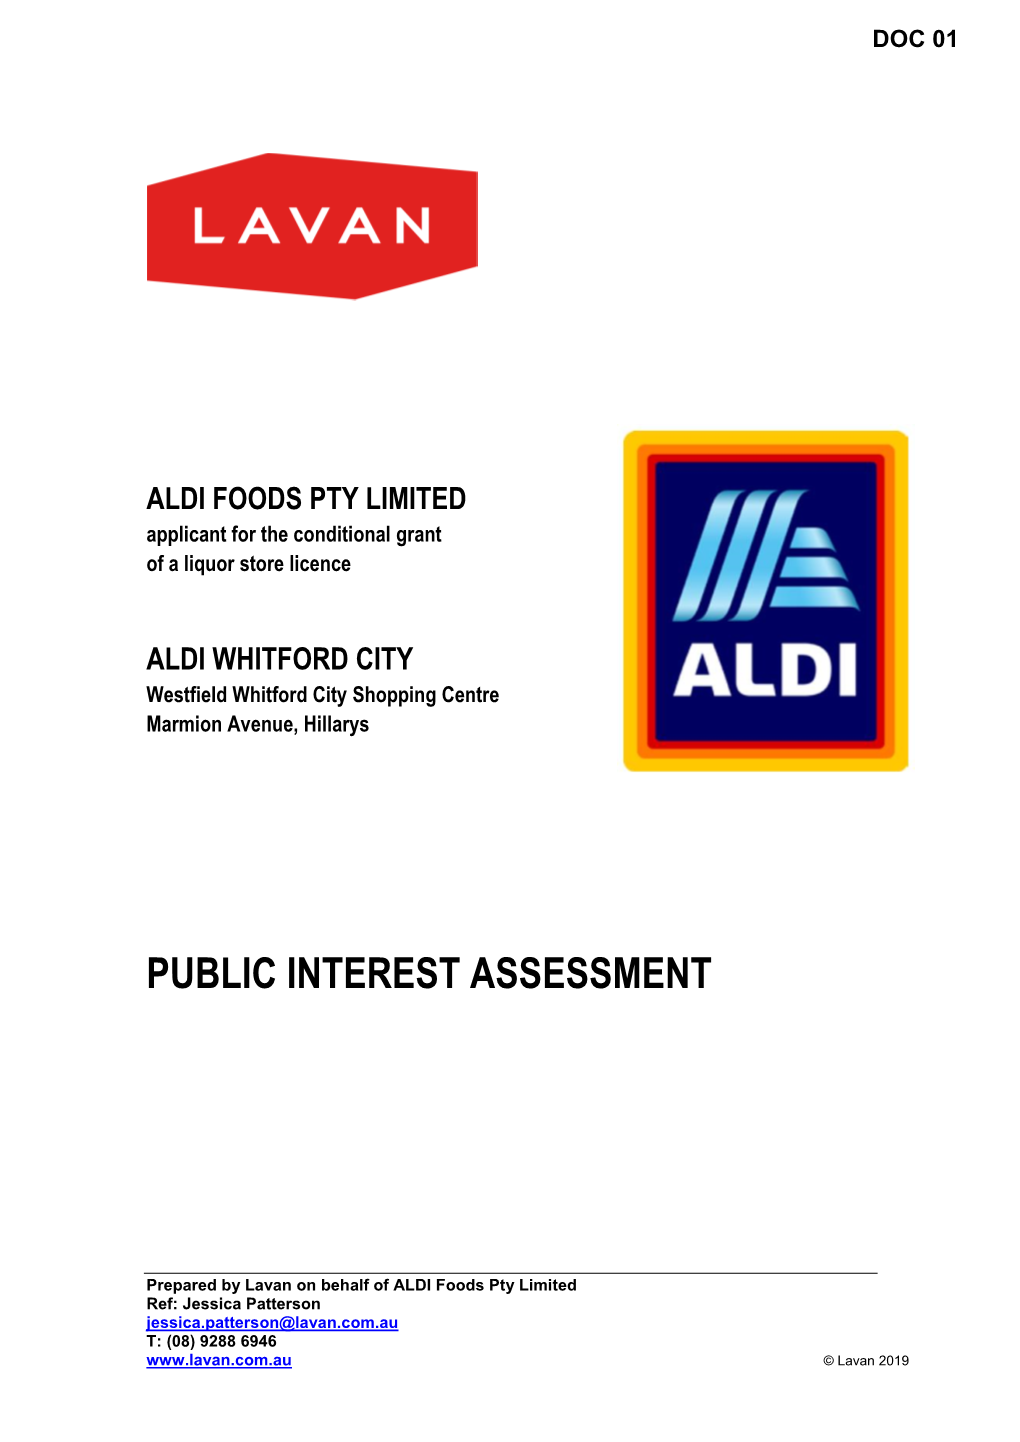 ALDI FOODS PTY LIMITED Applicant for the Conditional Grant of a Liquor Store Licence